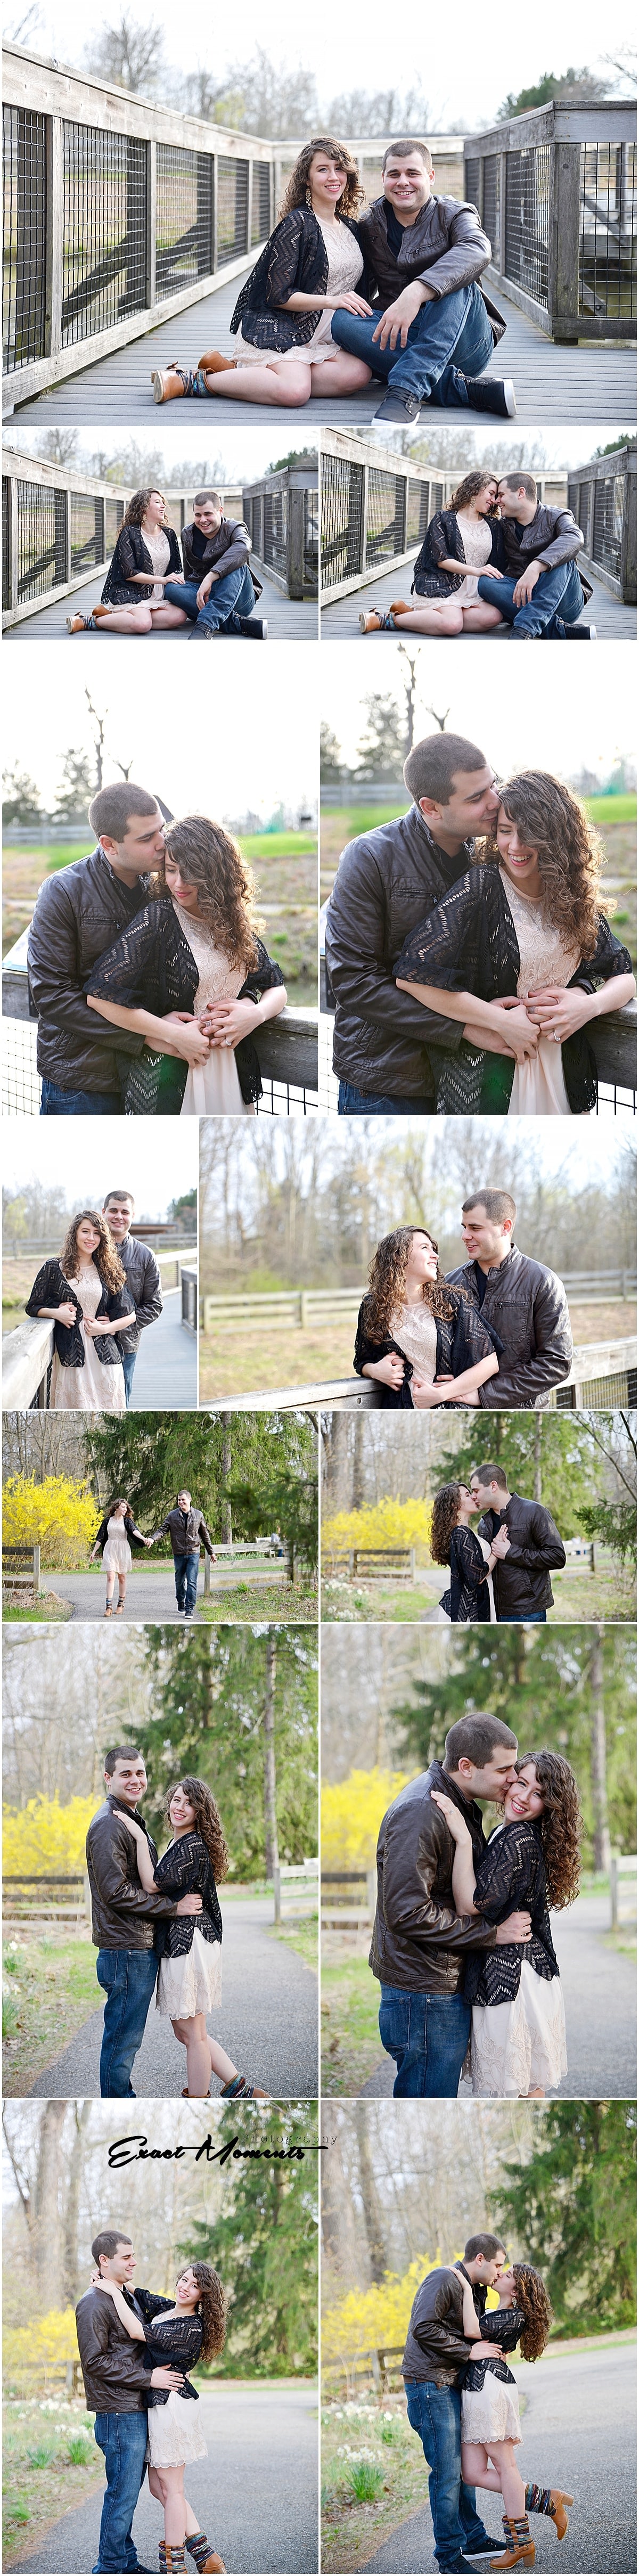 Plus Size Photography | Couple photography poses, Engagement photo poses,  Photography poses